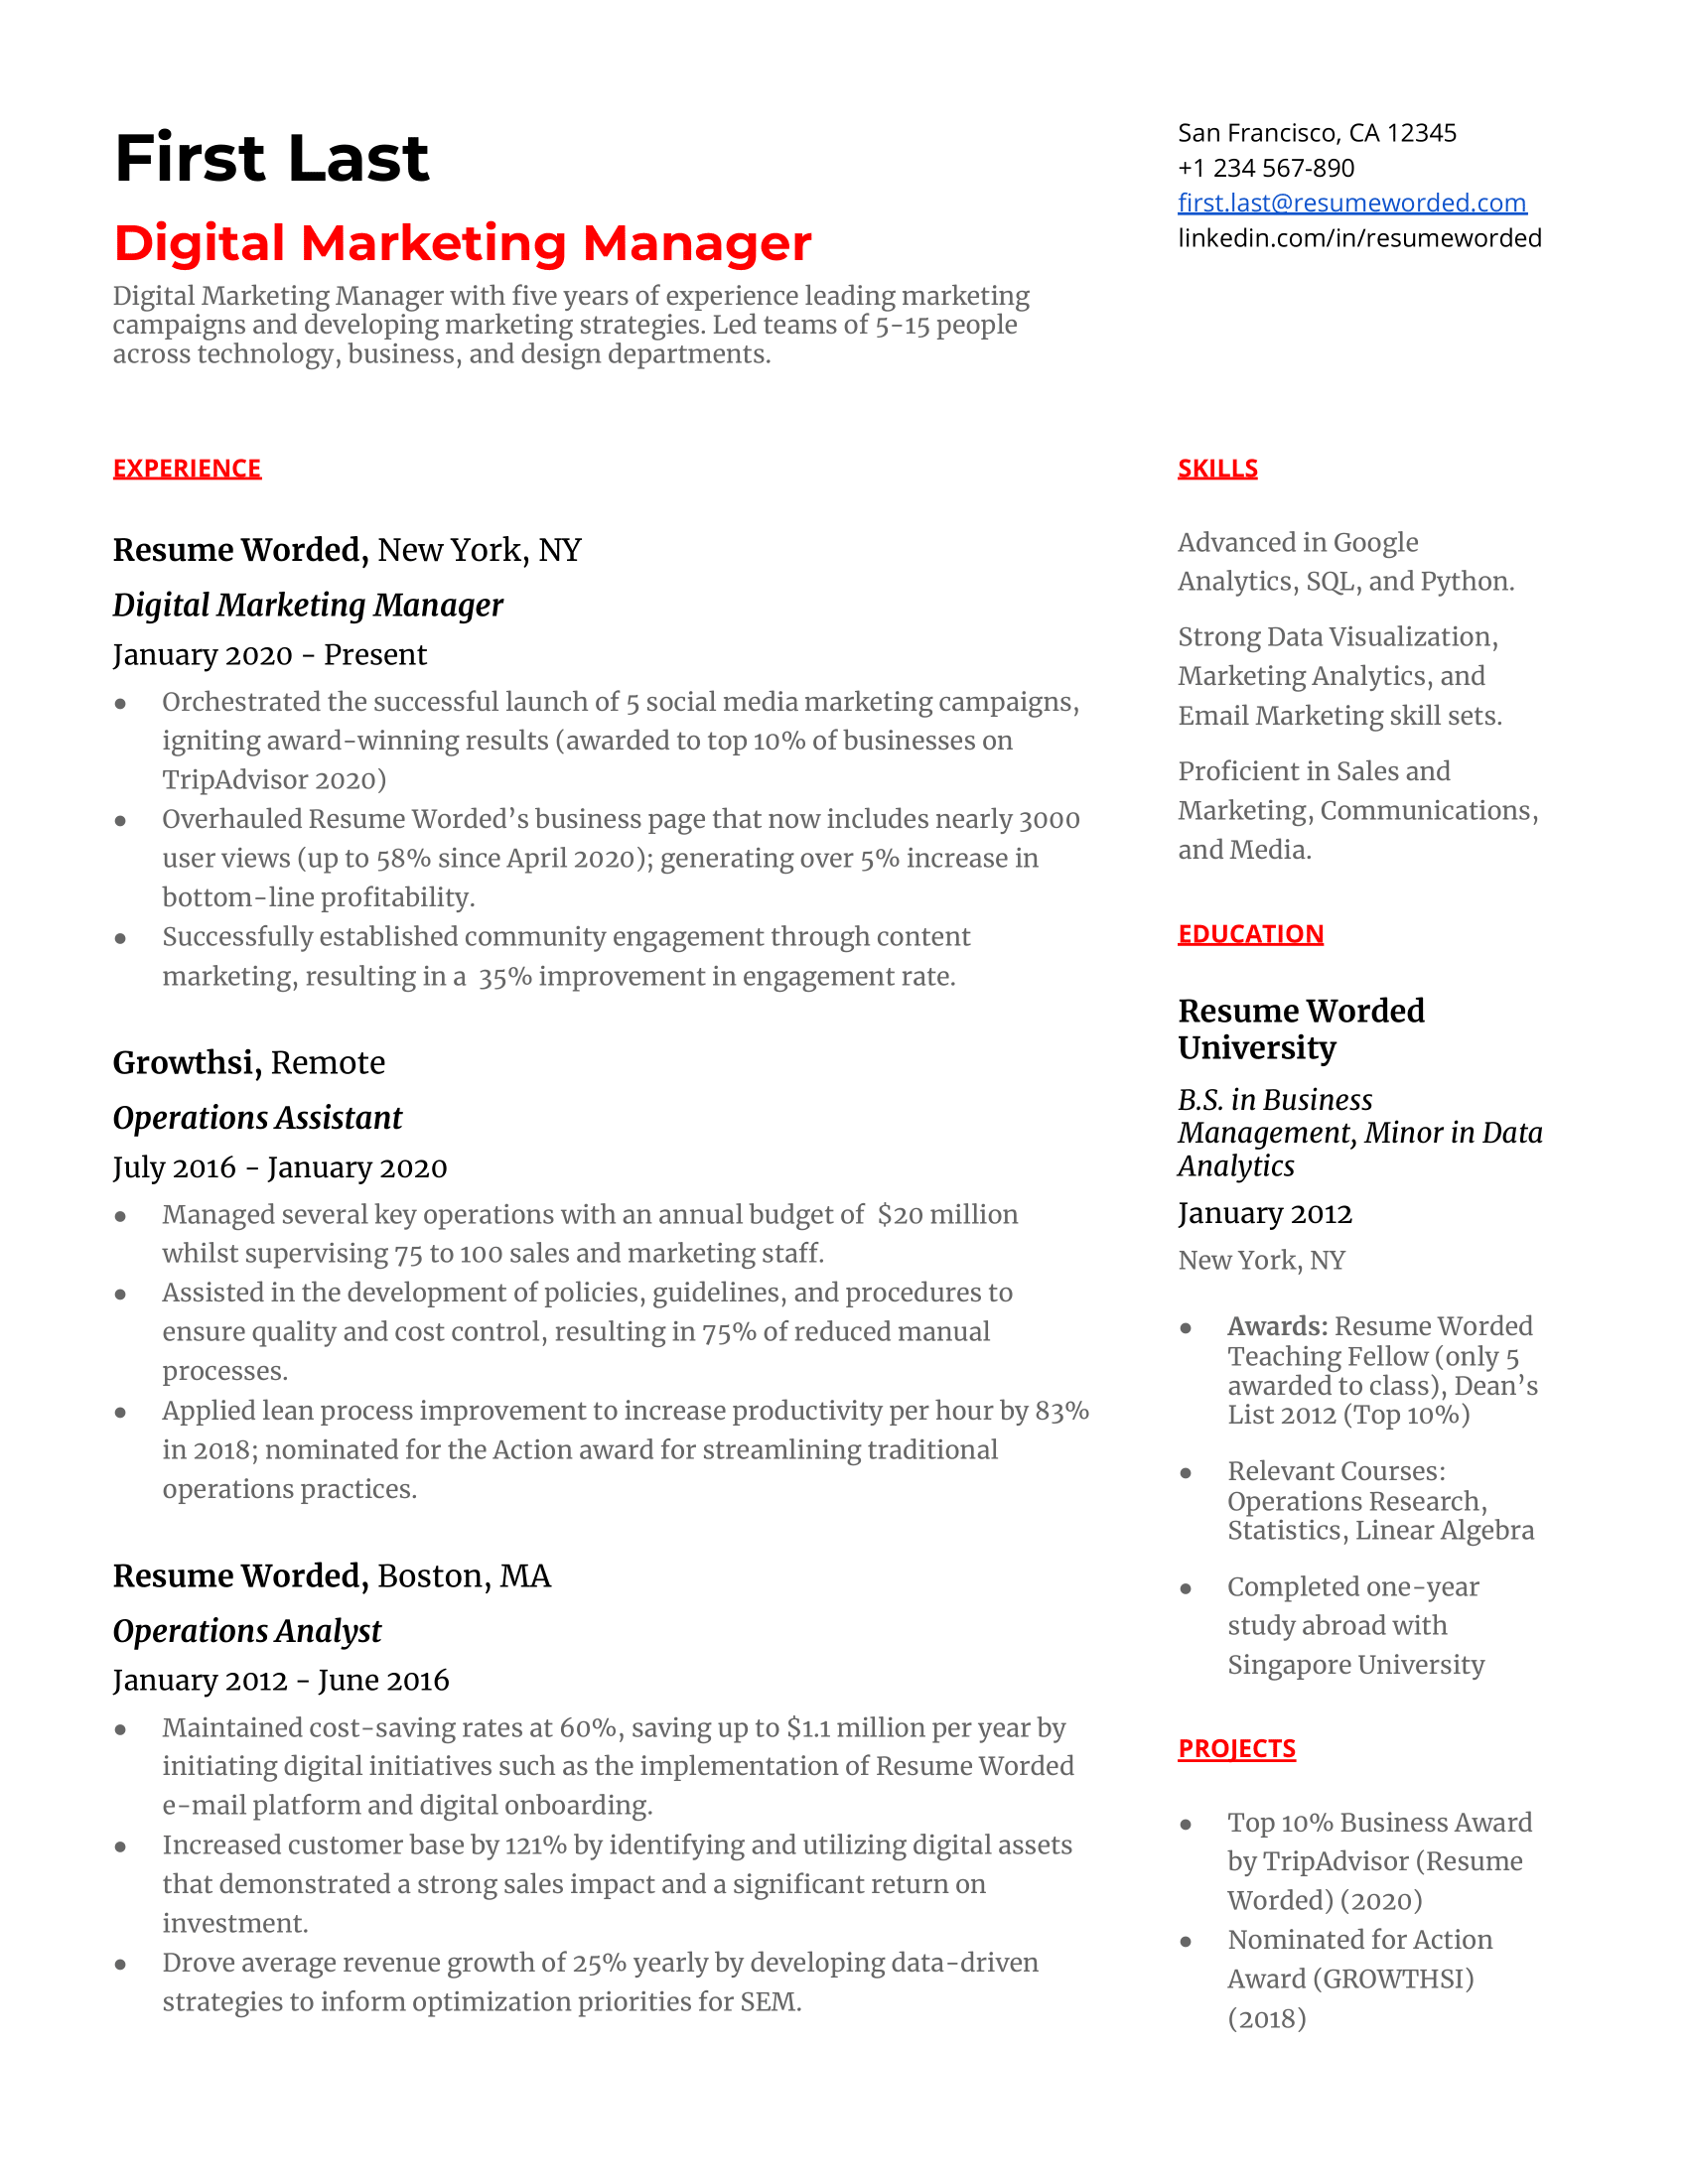 A digital marketing manager resume template that combines professional management and digital marketing experience, relevant education, and transferable hard skills. 